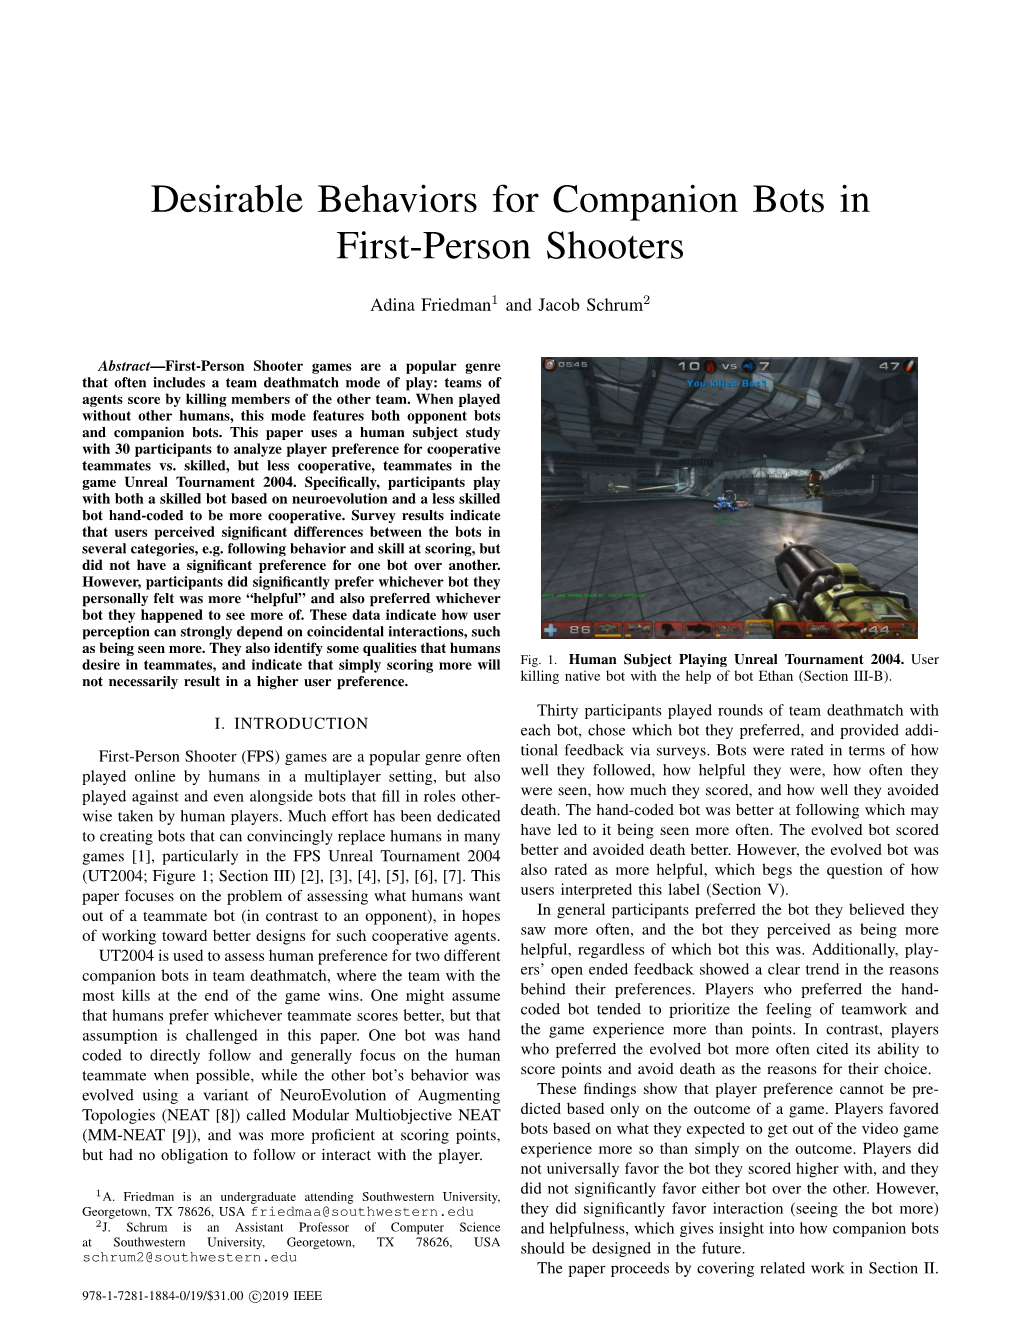 Desirable Behaviors for Companion Bots in First-Person Shooters